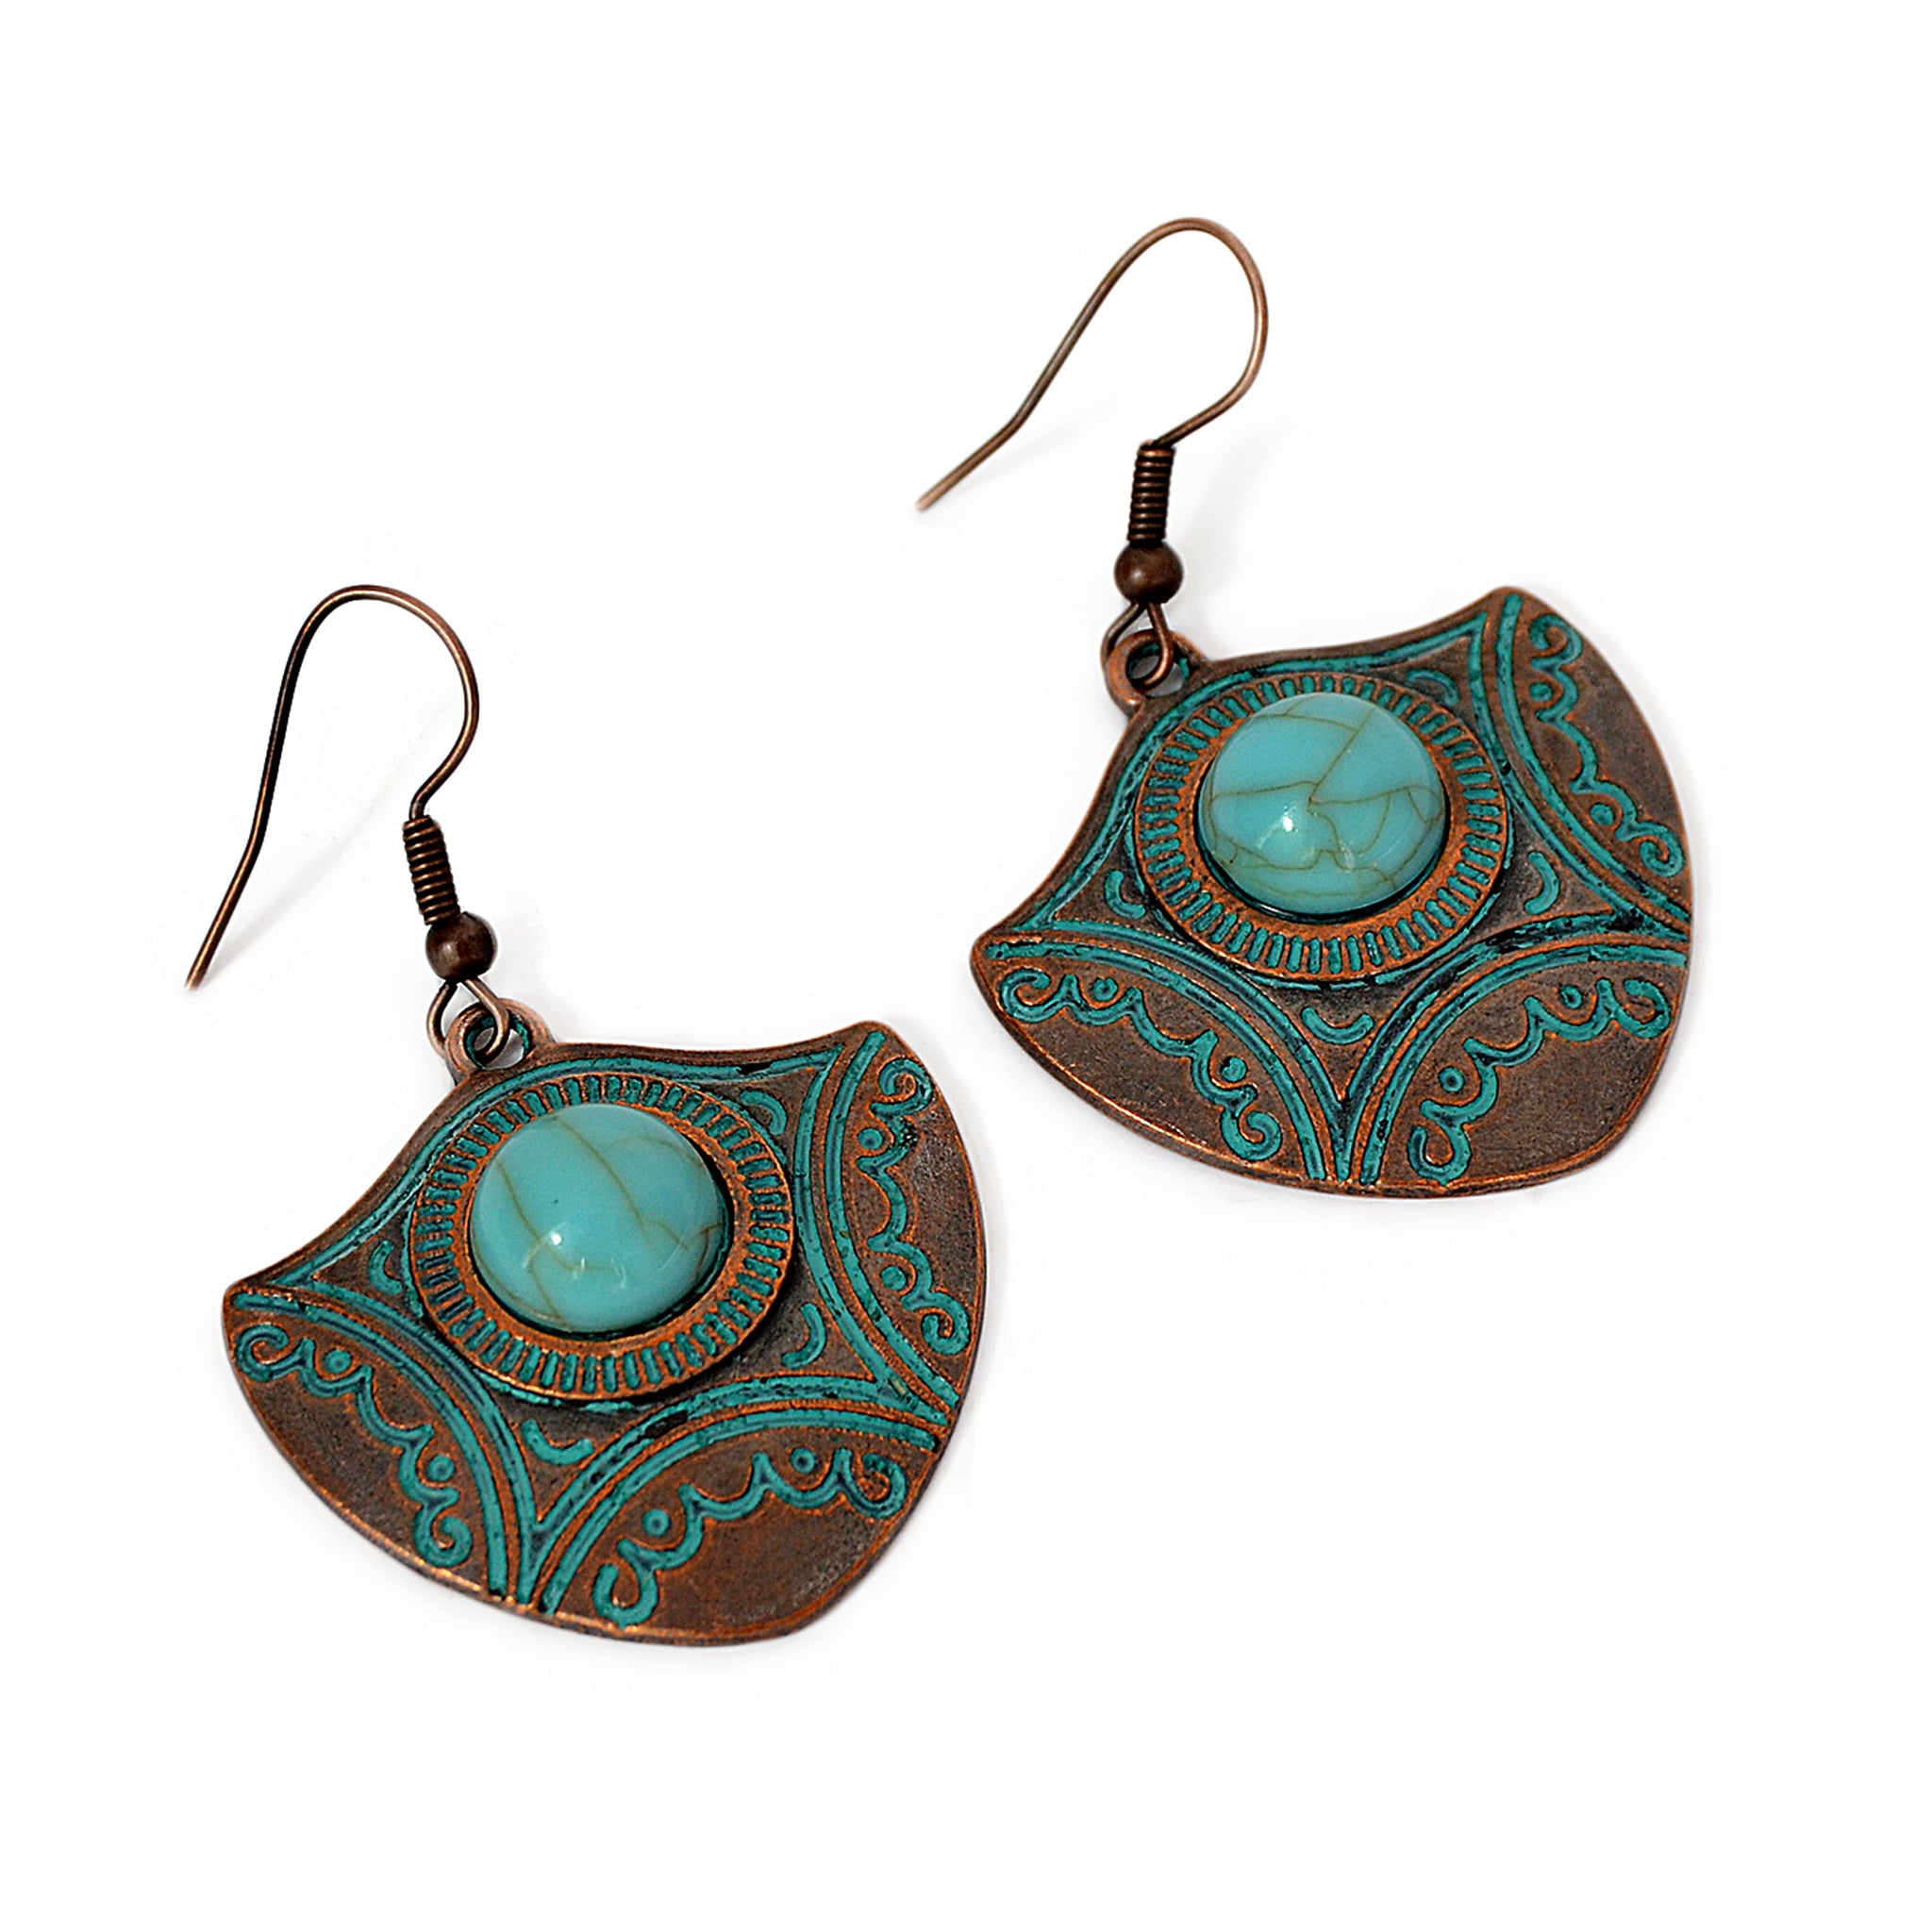 Tribal arrow earrings with turquoise bead and aged blue patina on copper